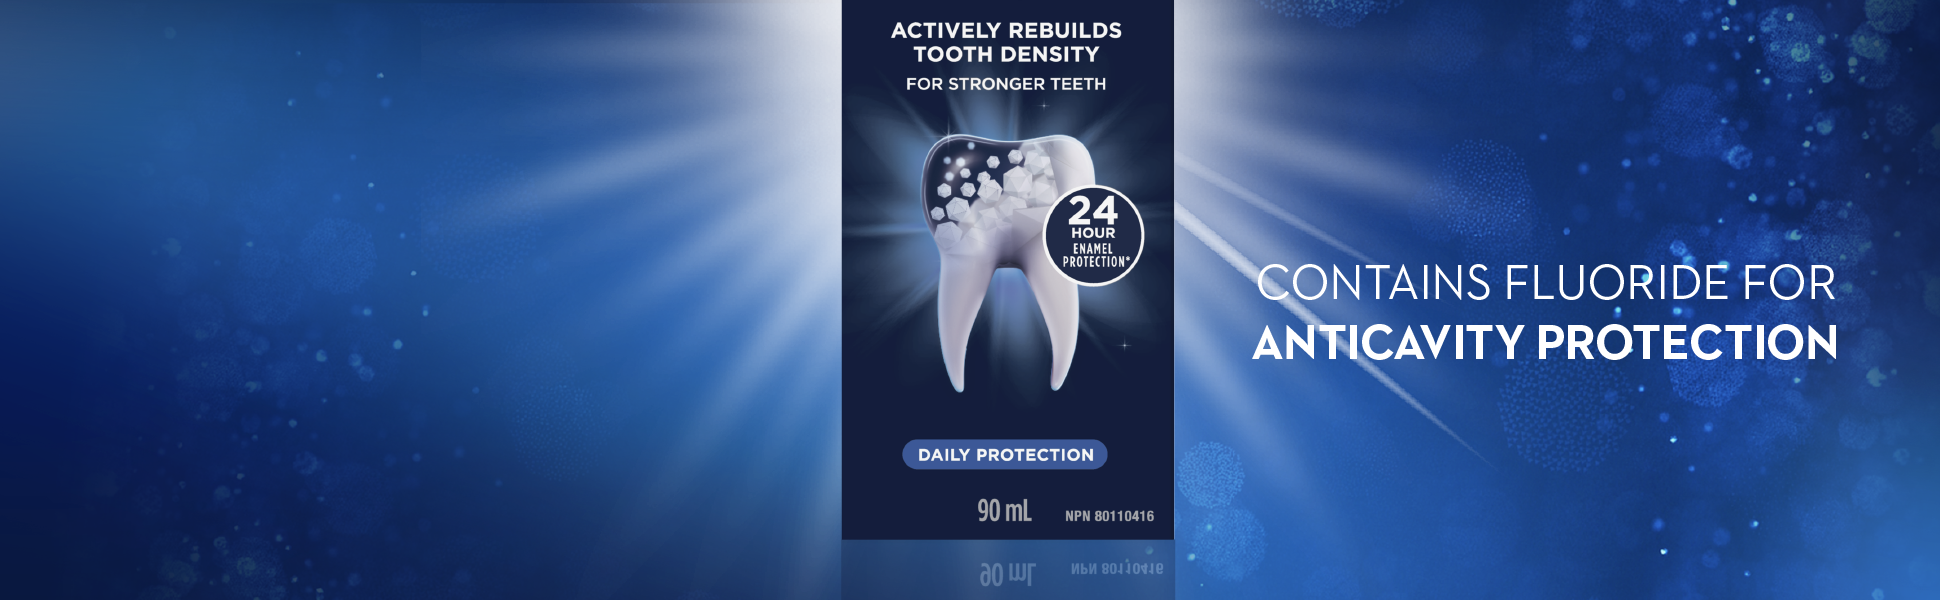 CREST PRO-HEALTH DENSIFY DAILY PROTECTION TOOTHPASTE - Enhanced Content 3